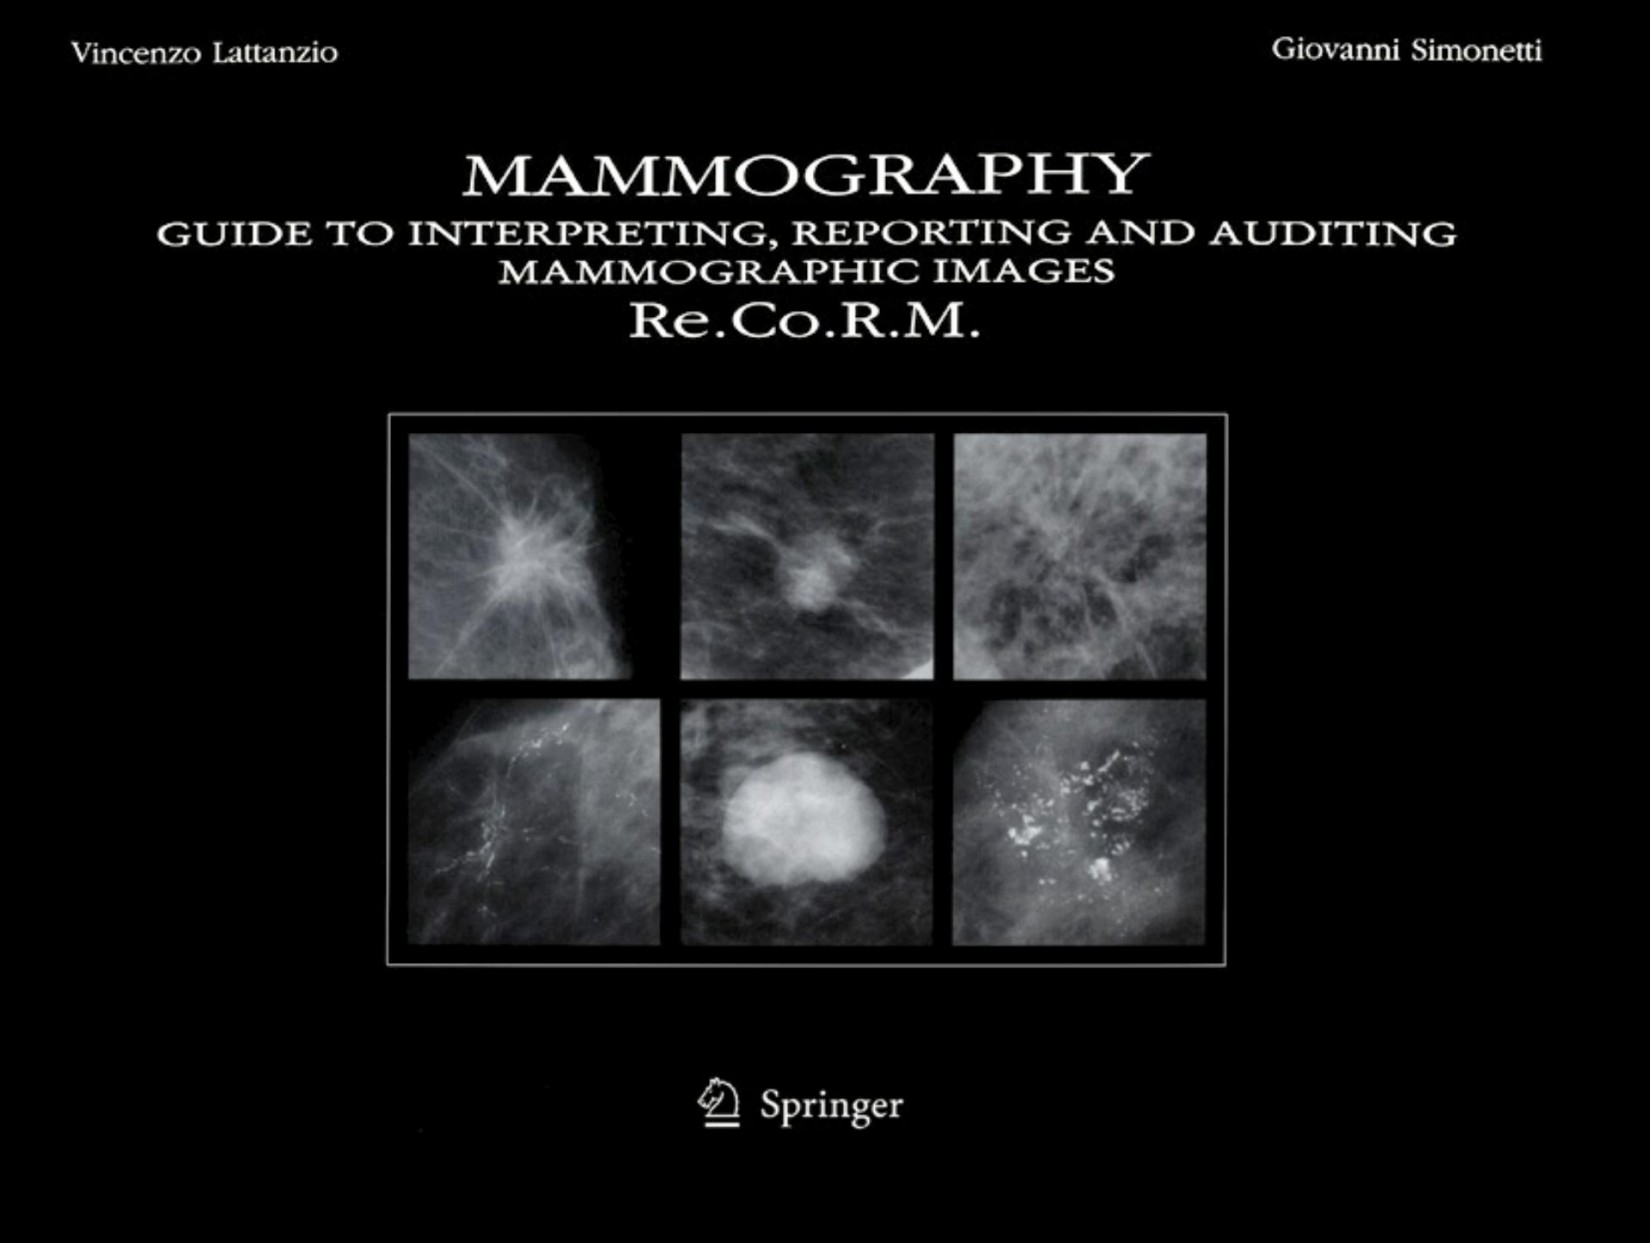 Matntnography: Guide to Interpreting, Reporting and Auditing Mammographic Images - Re.Co.R.M